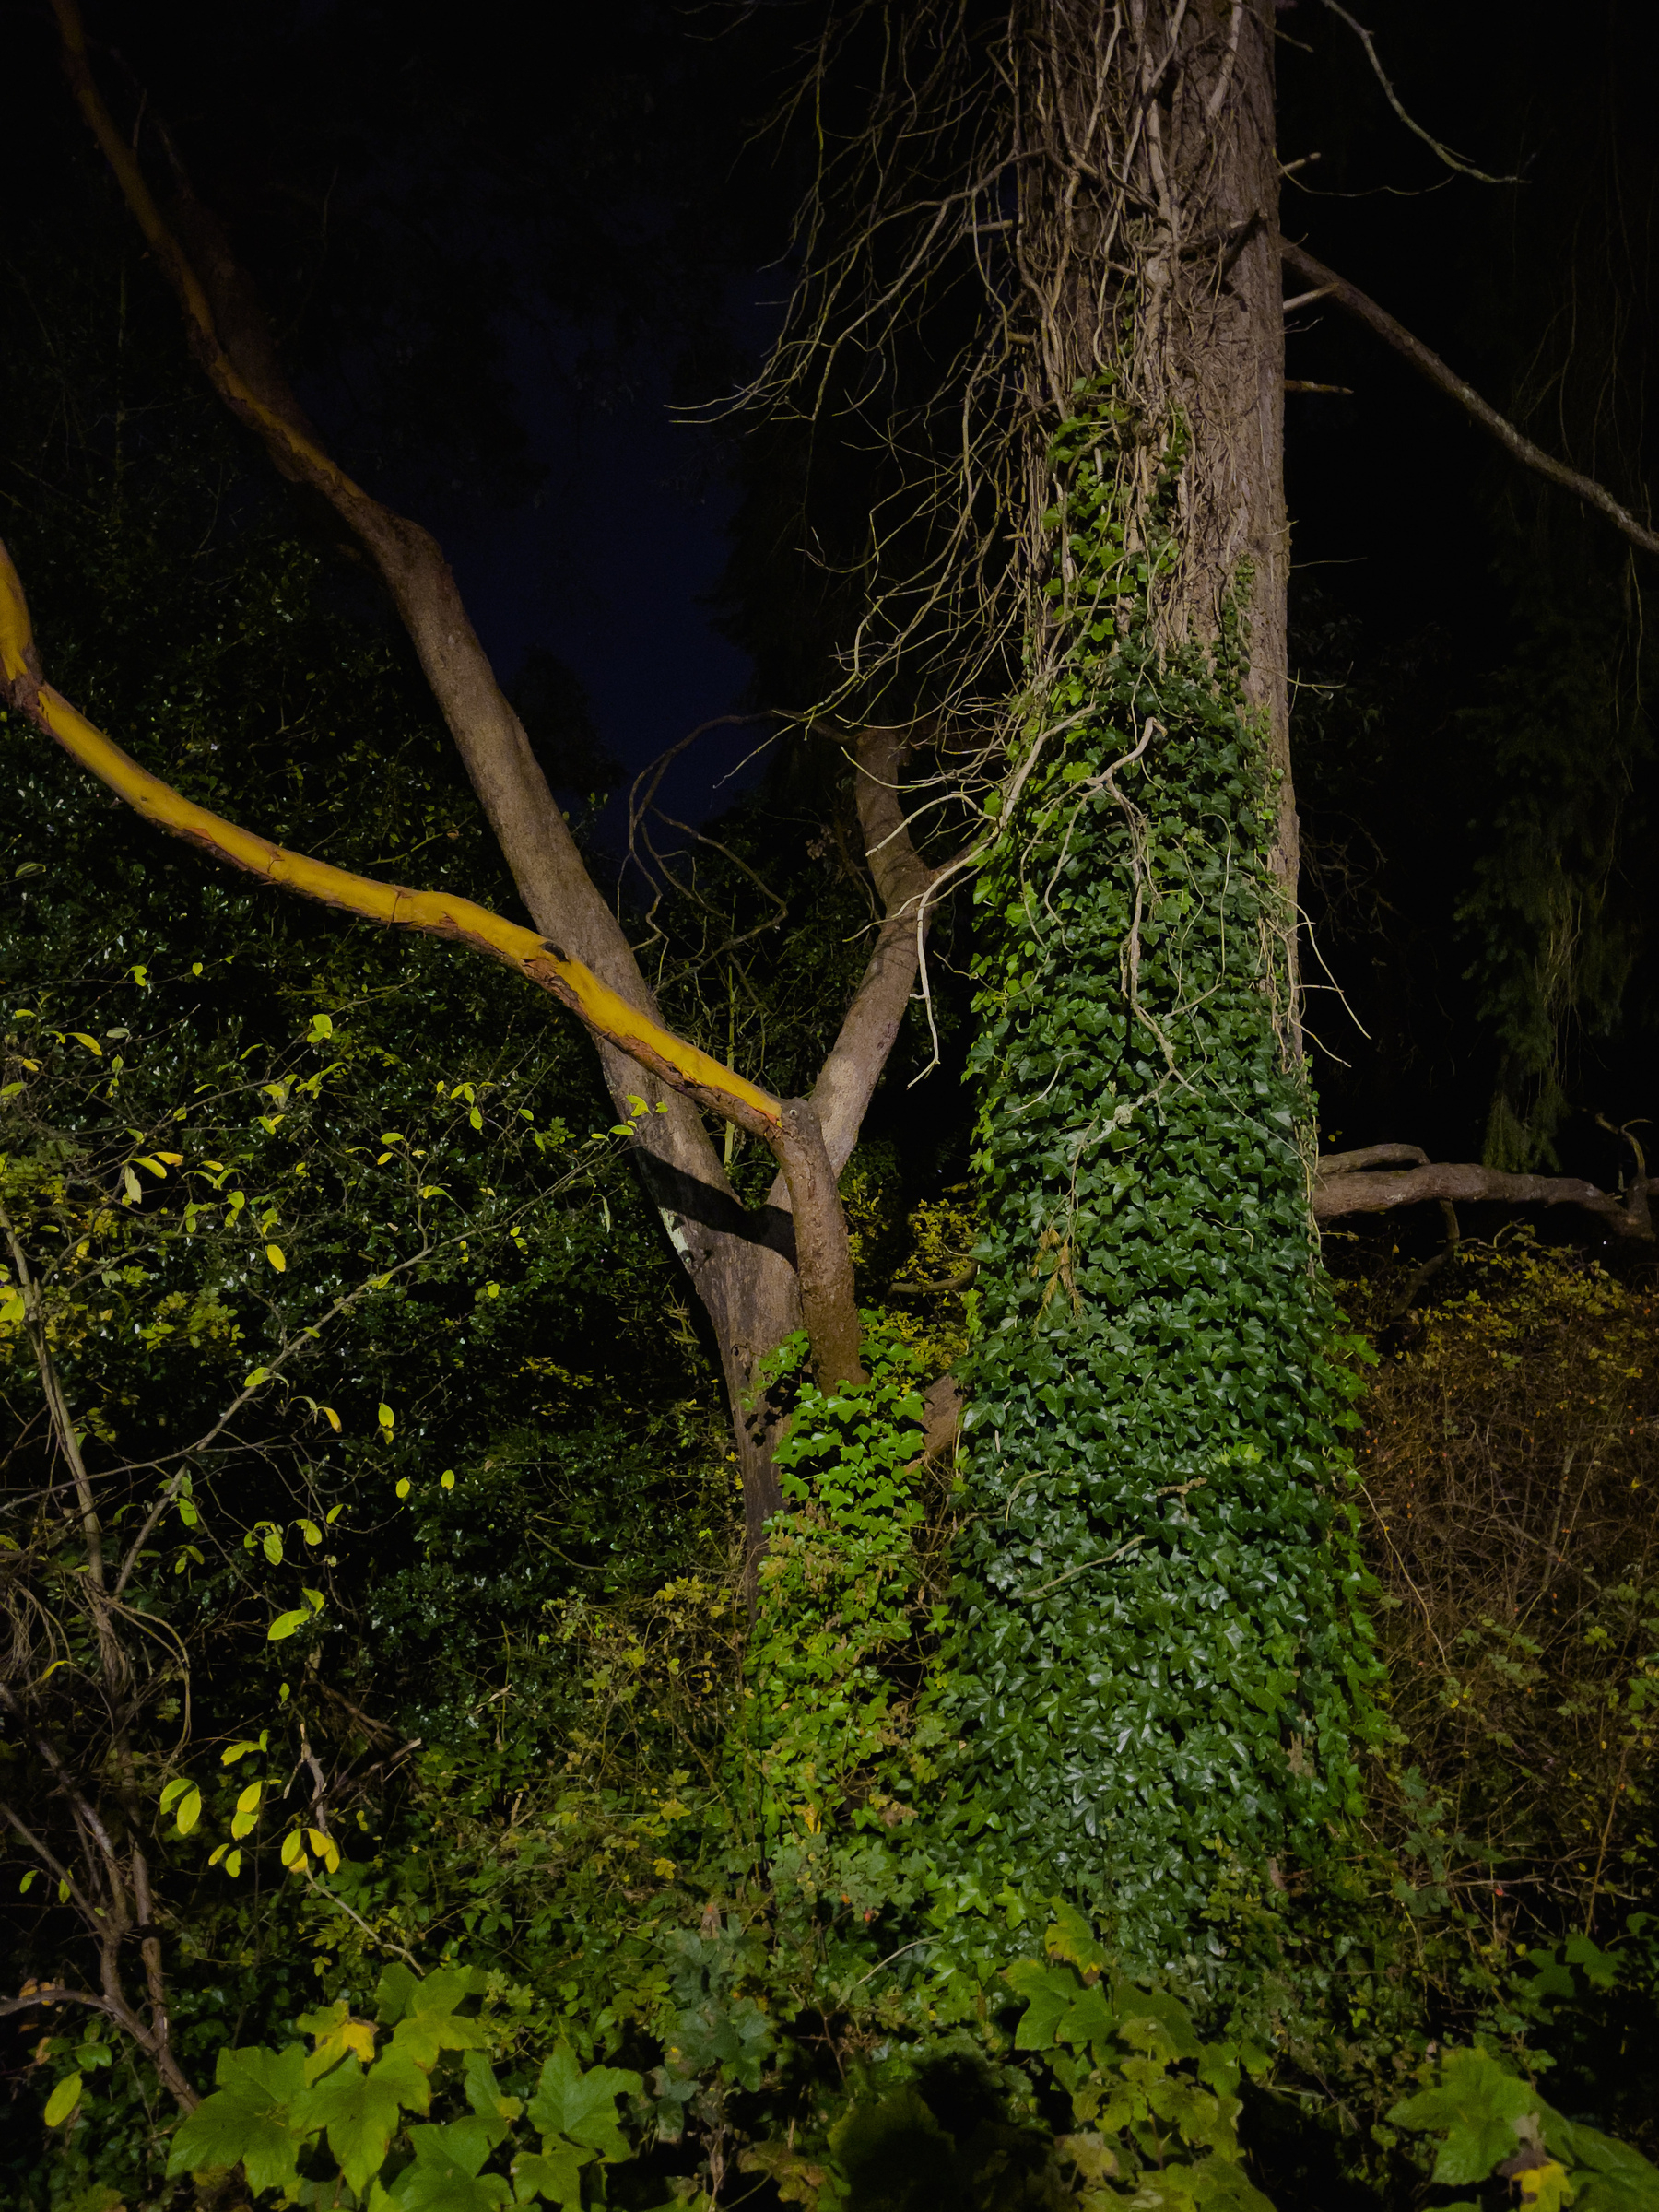 Tree trunk and branches illuminated by streetlights with landscape in deep shadow behind.